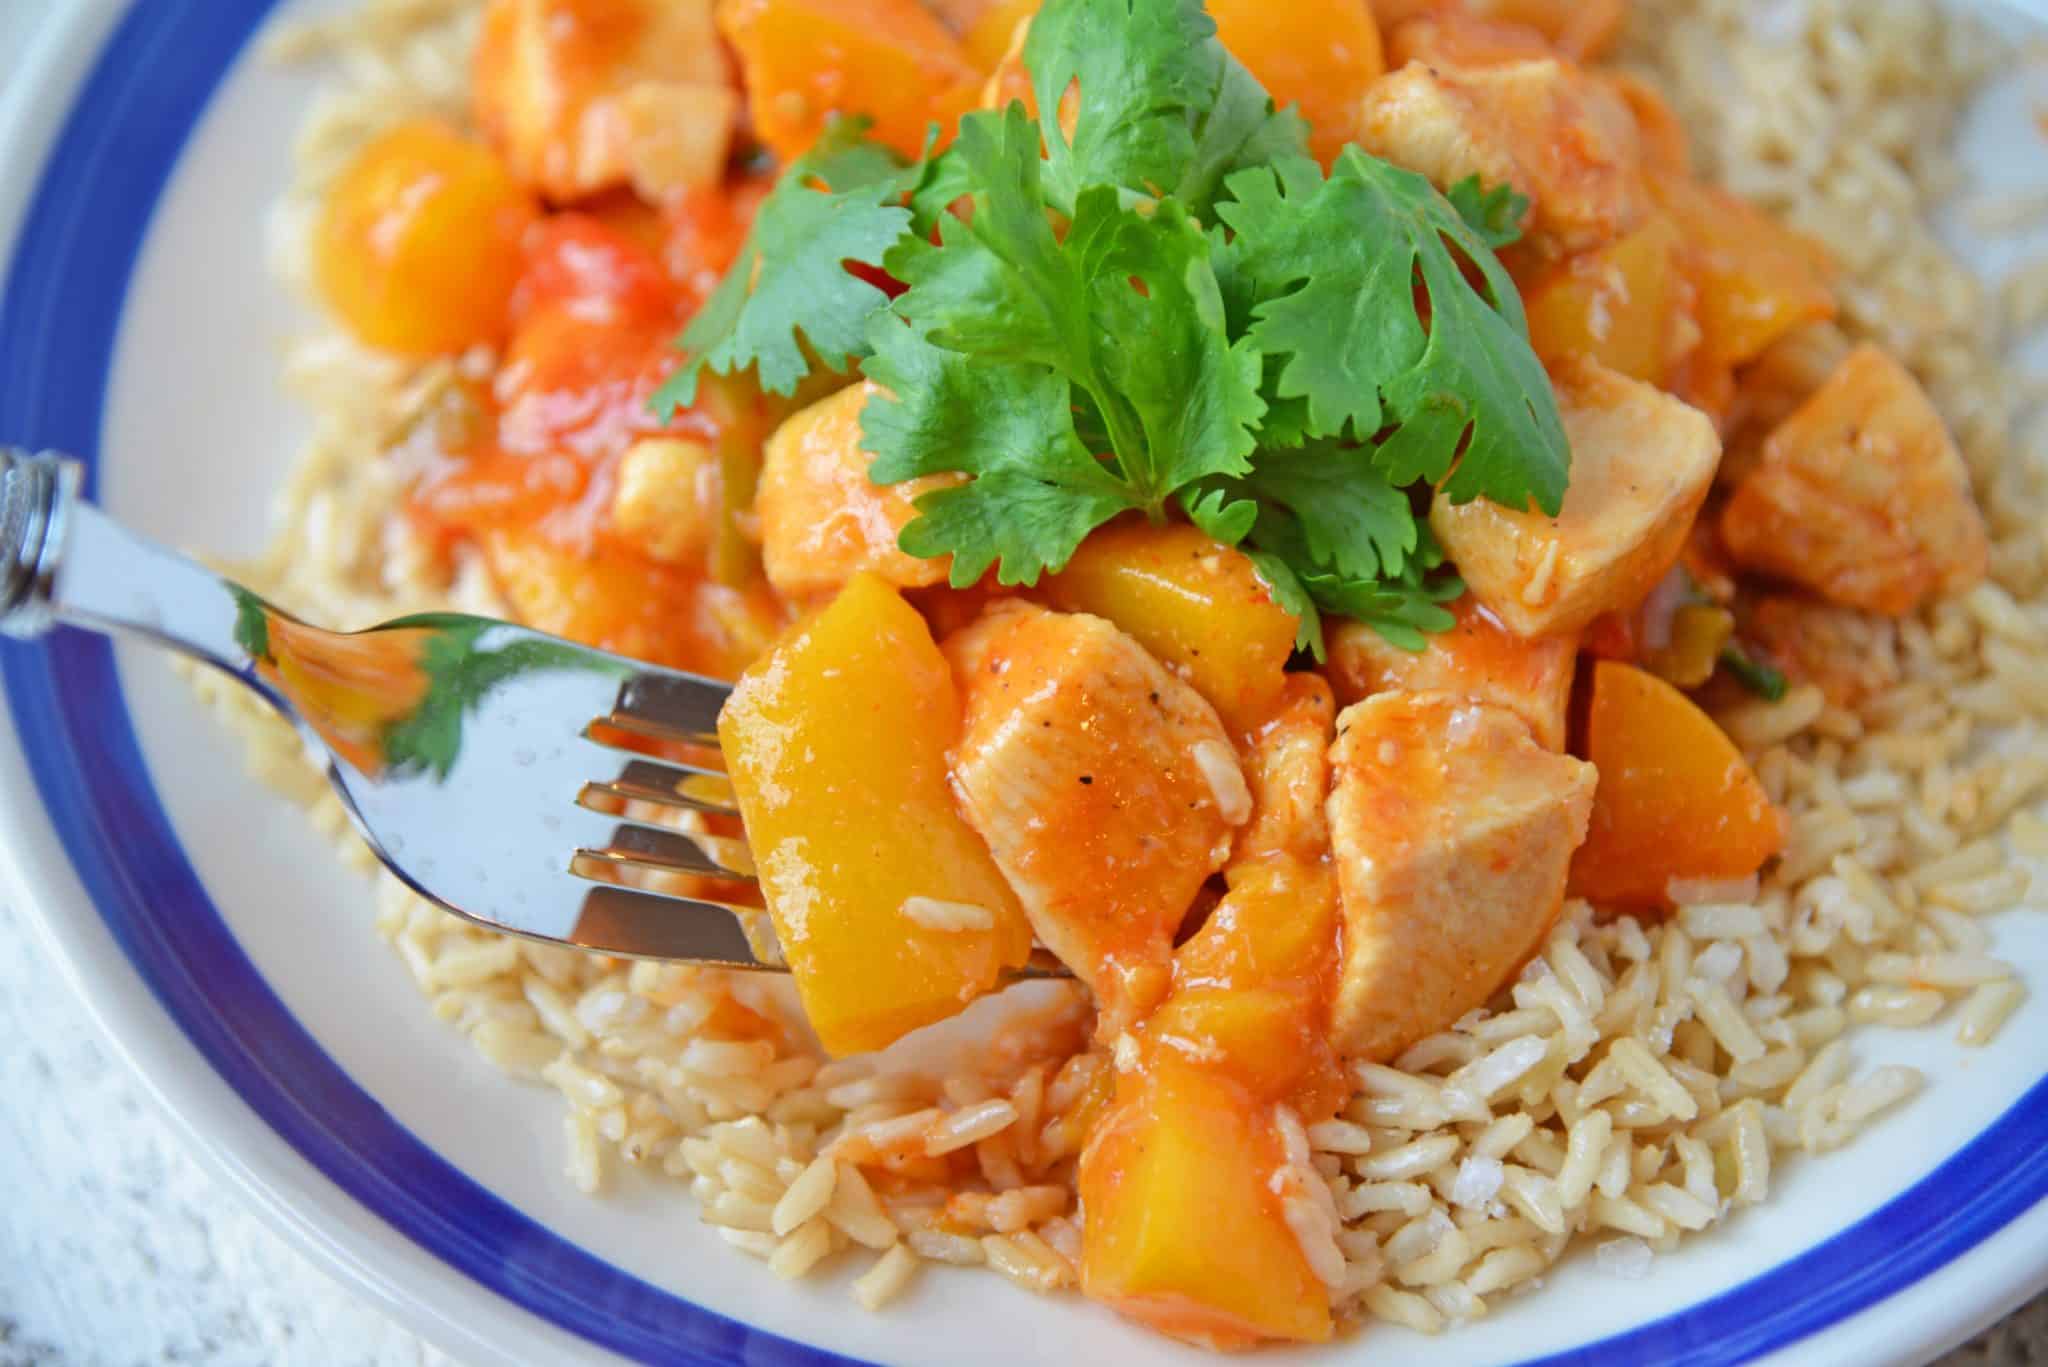 Peach Chicken Picante is a quick dinner recipe using chicken, peaches and salsa! This delicious flavor combination will give you a sweet and spicy dish! #chickenbreastrecipes #easychickenrecipes #healthychickenrecipes www.savoryexperiments.com 